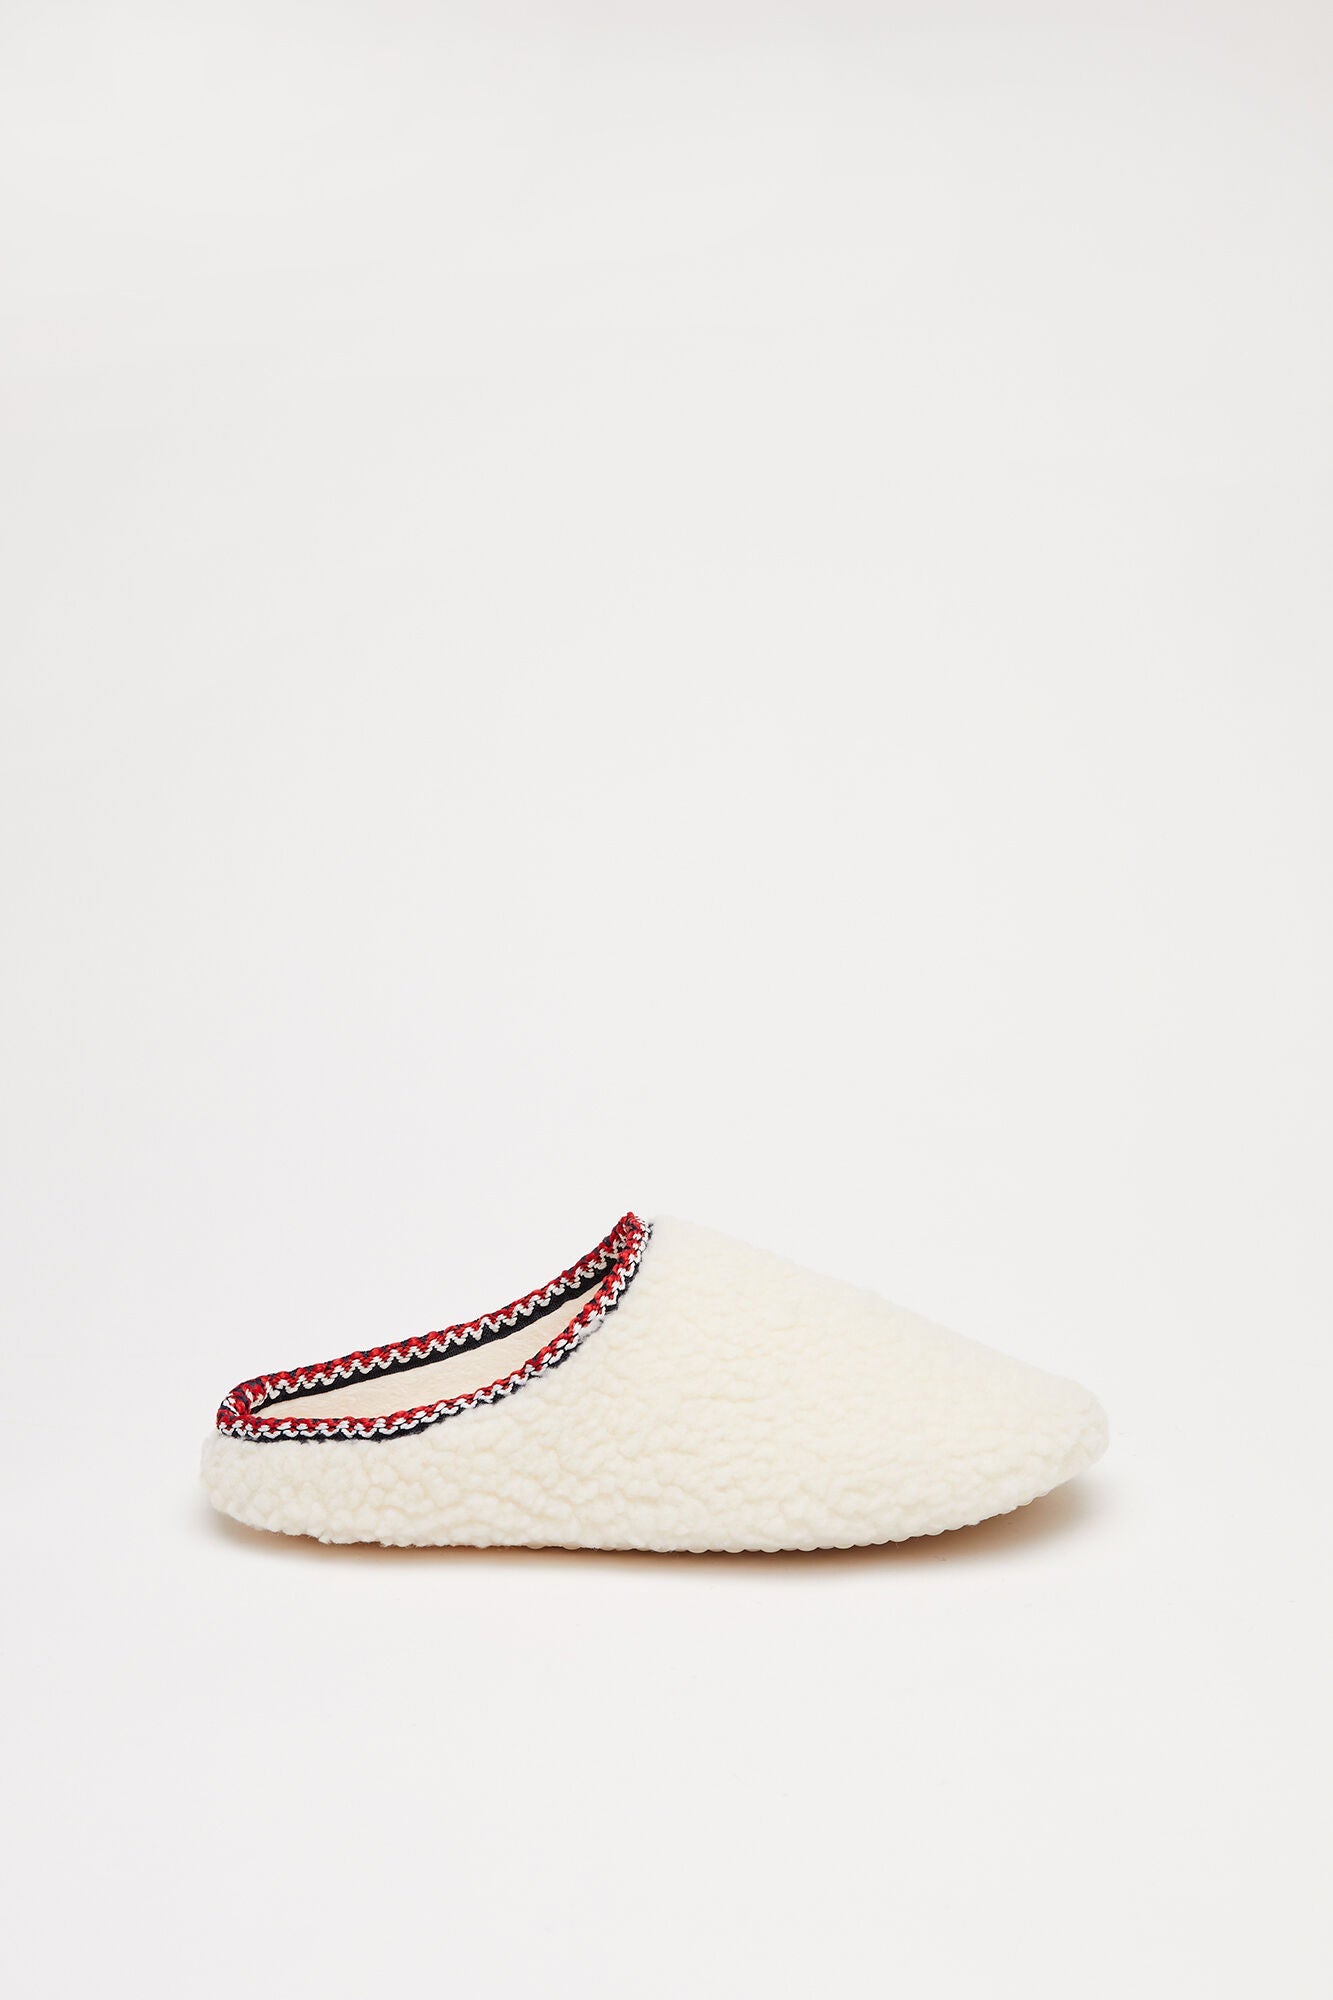 Ivory slippers